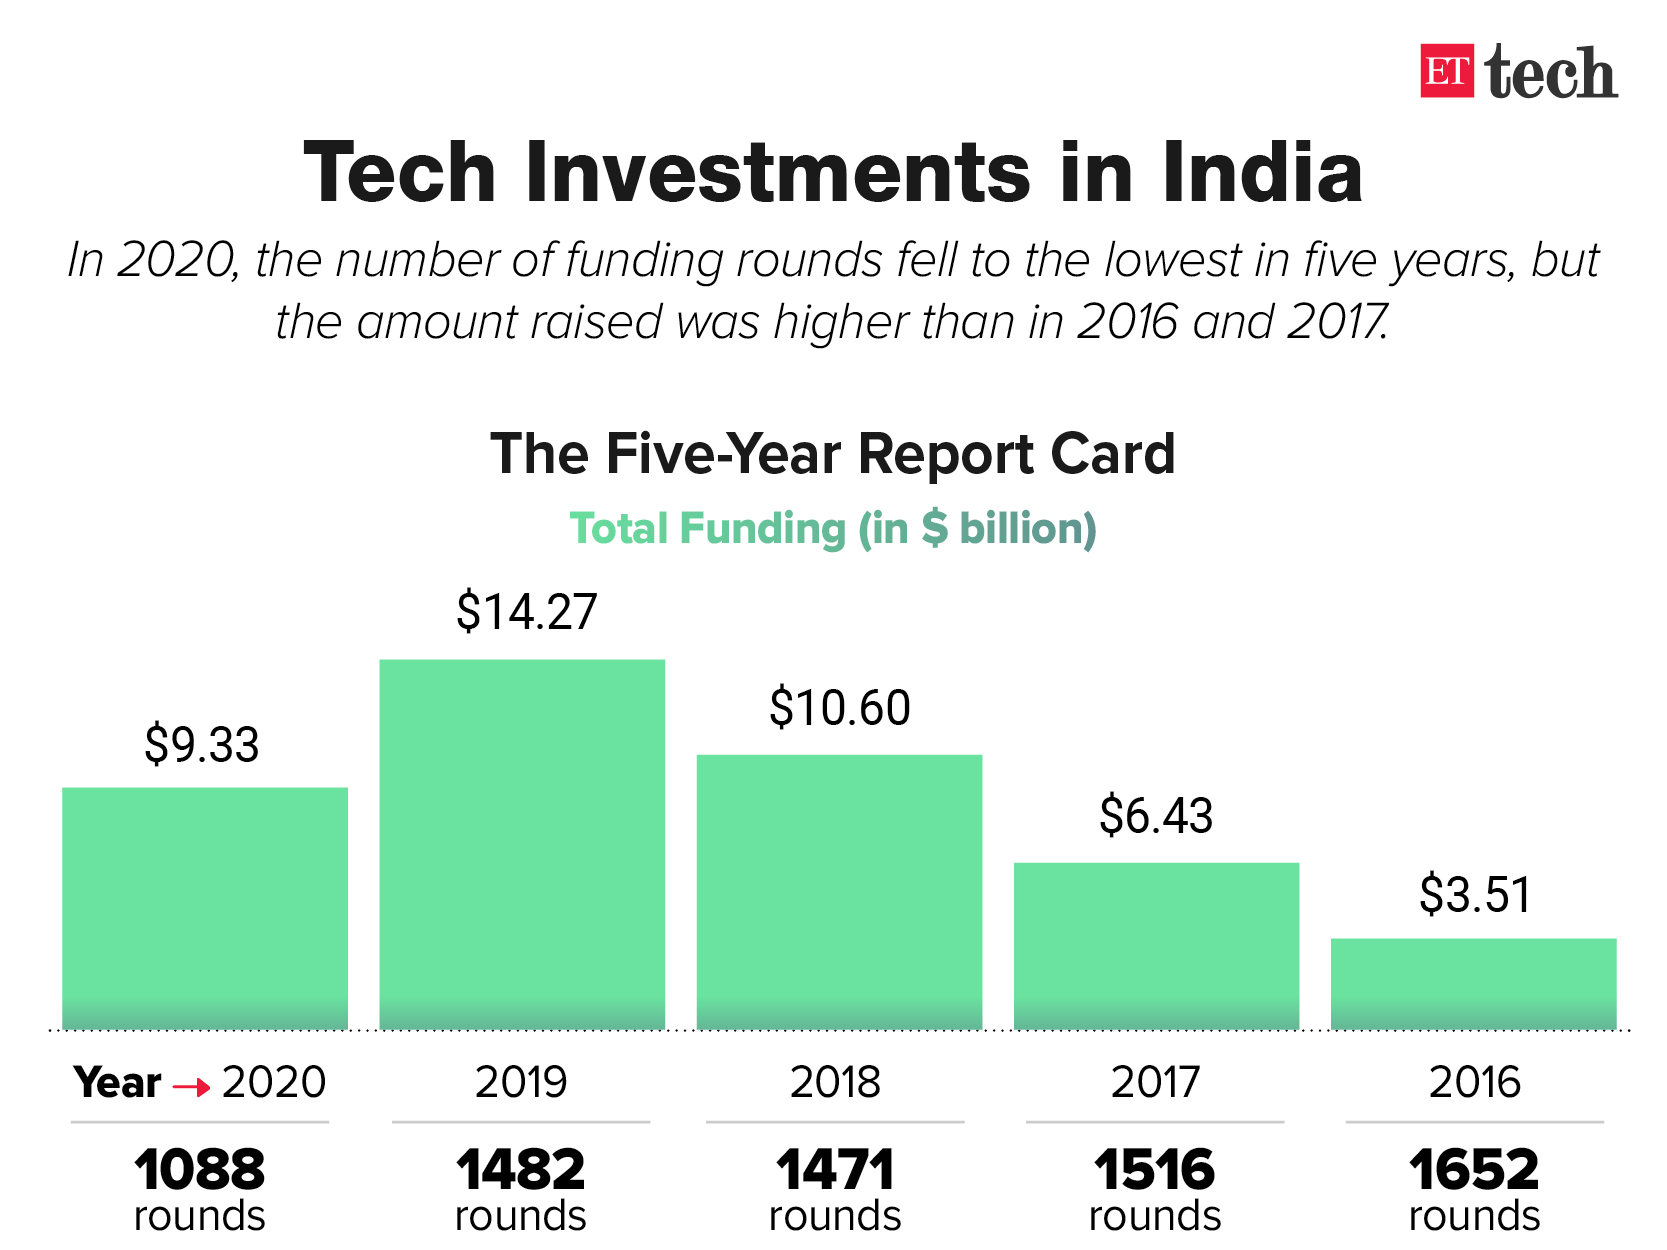 Risk investors pour in $9.3 billion in 2020 to back Indian startups despite Covid-19 woes